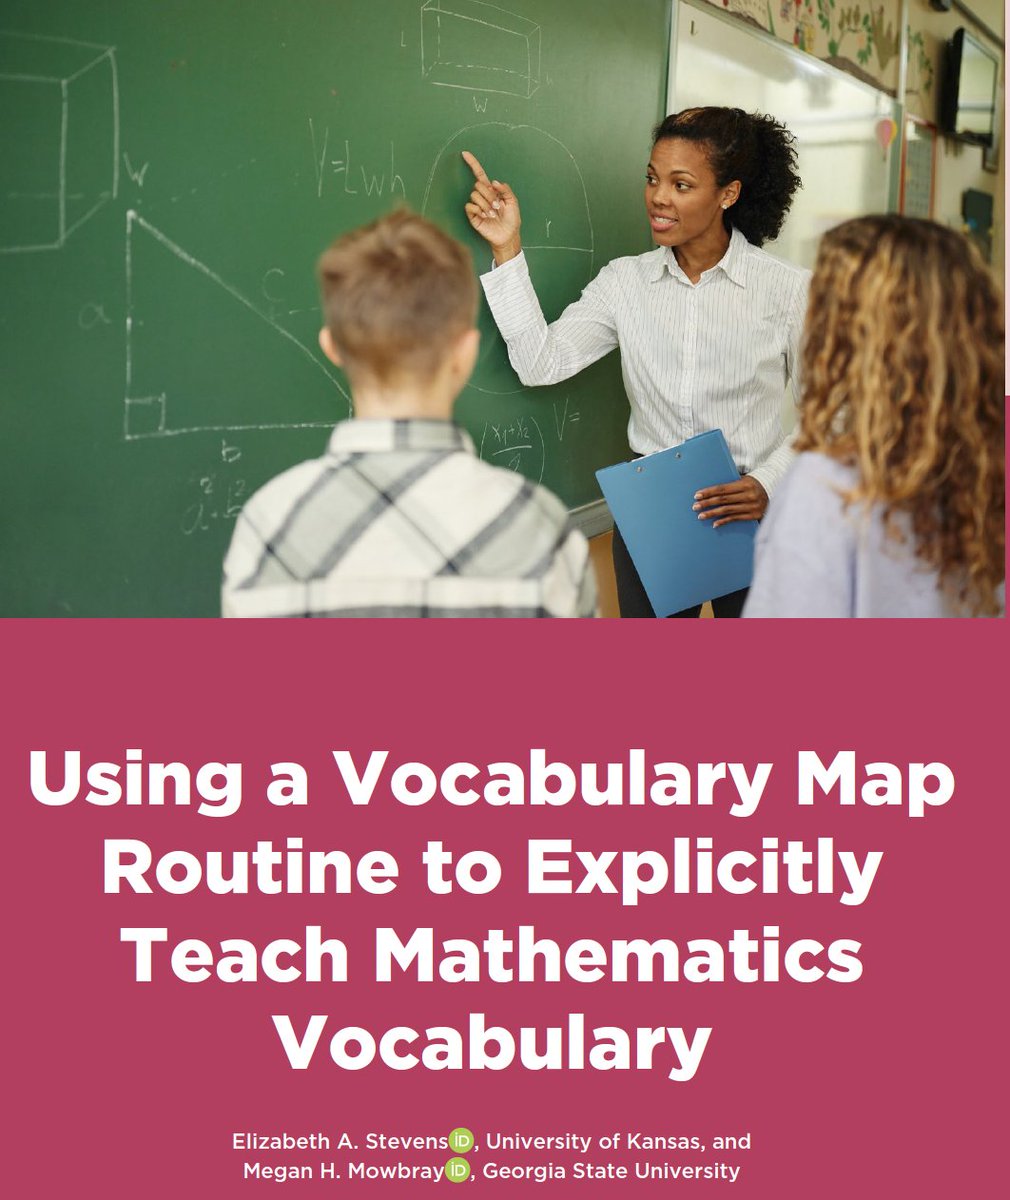 🚨🚨New pub alert! Check out our new paper in @TEC_CEC! We provide a step-by-step #explicit #vocabulary routine for teaching #mathwords to students with #mathdifficulty 👇👇👏👏 Check it out! @KUSpecialEd @KUSOEHS @KUCDD Access the paper here: doi.org/10.1177/004005…